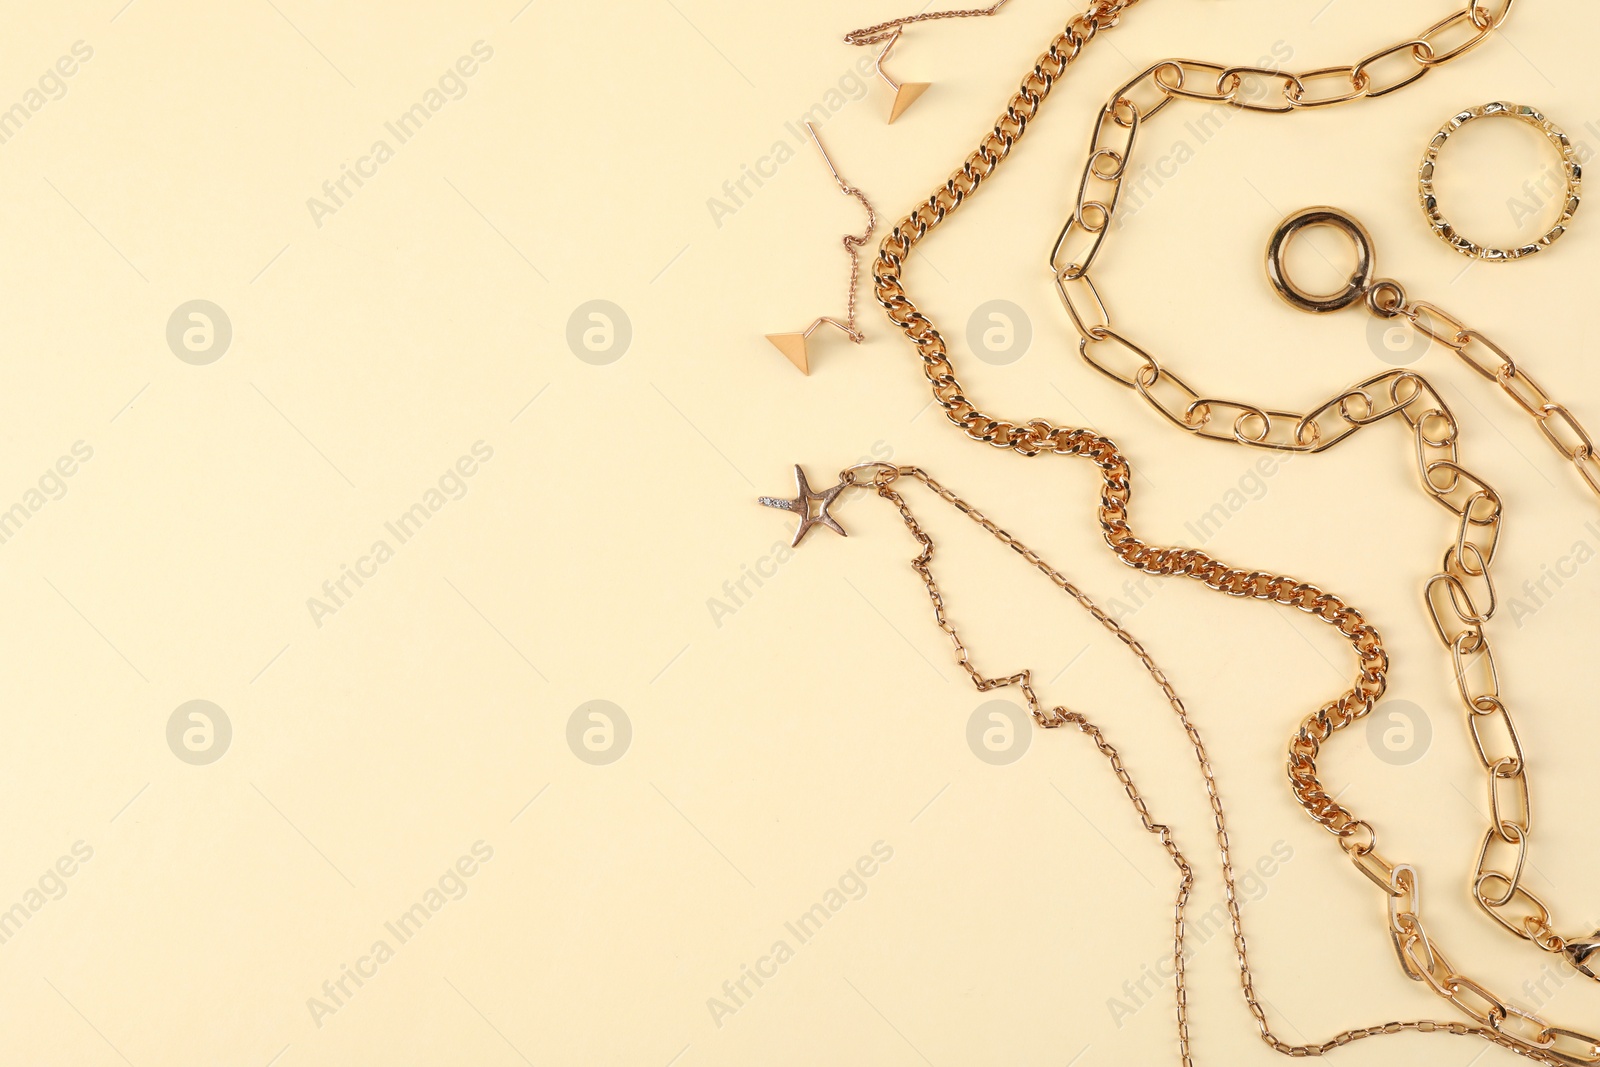 Photo of Metal chains and other different accessories on beige background, flat lay with space for text. Luxury jewelry